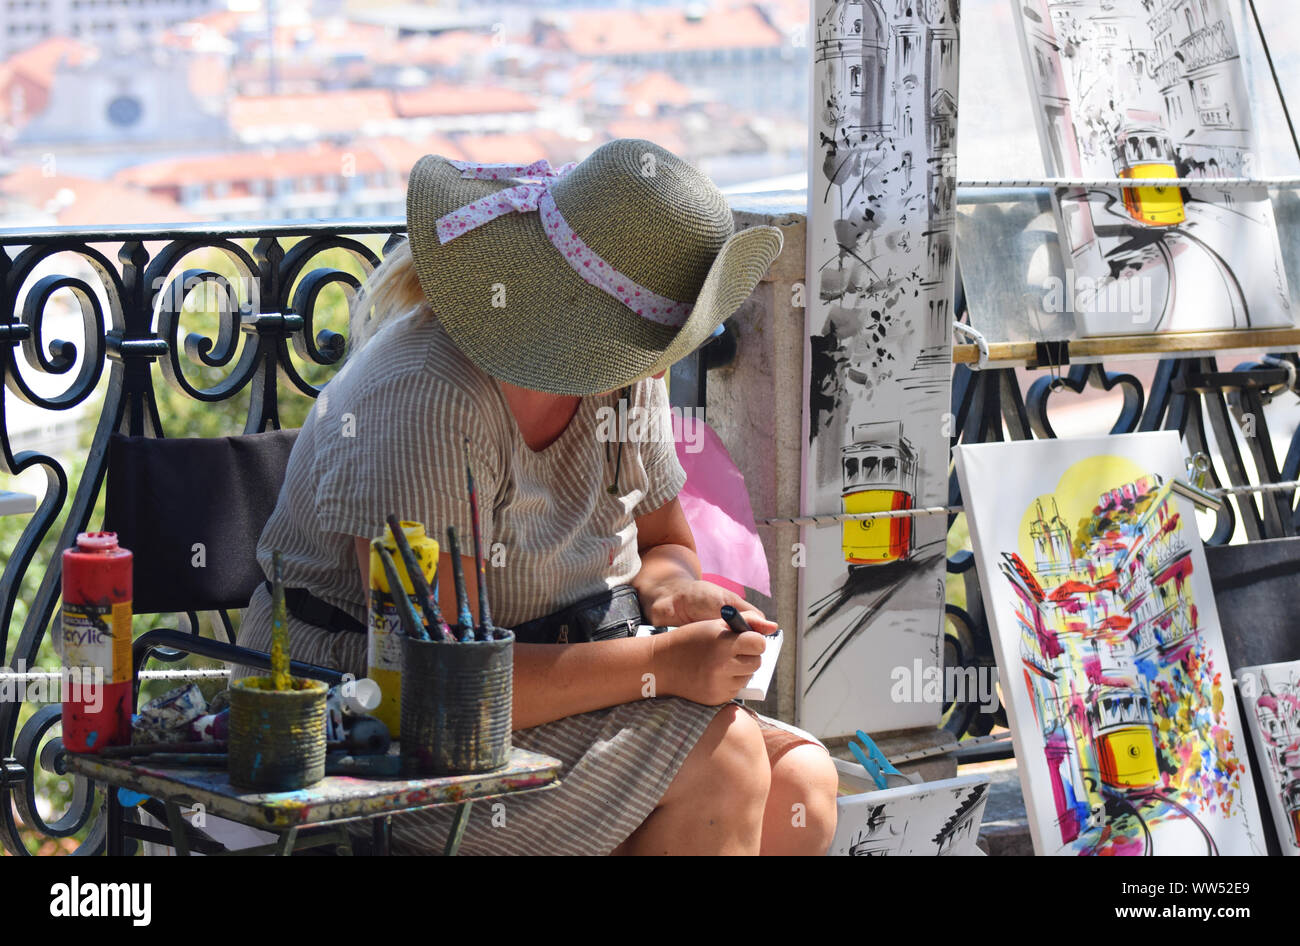 An artist selling her original paintings to tourists in Lisbon Portugal Stock Photo